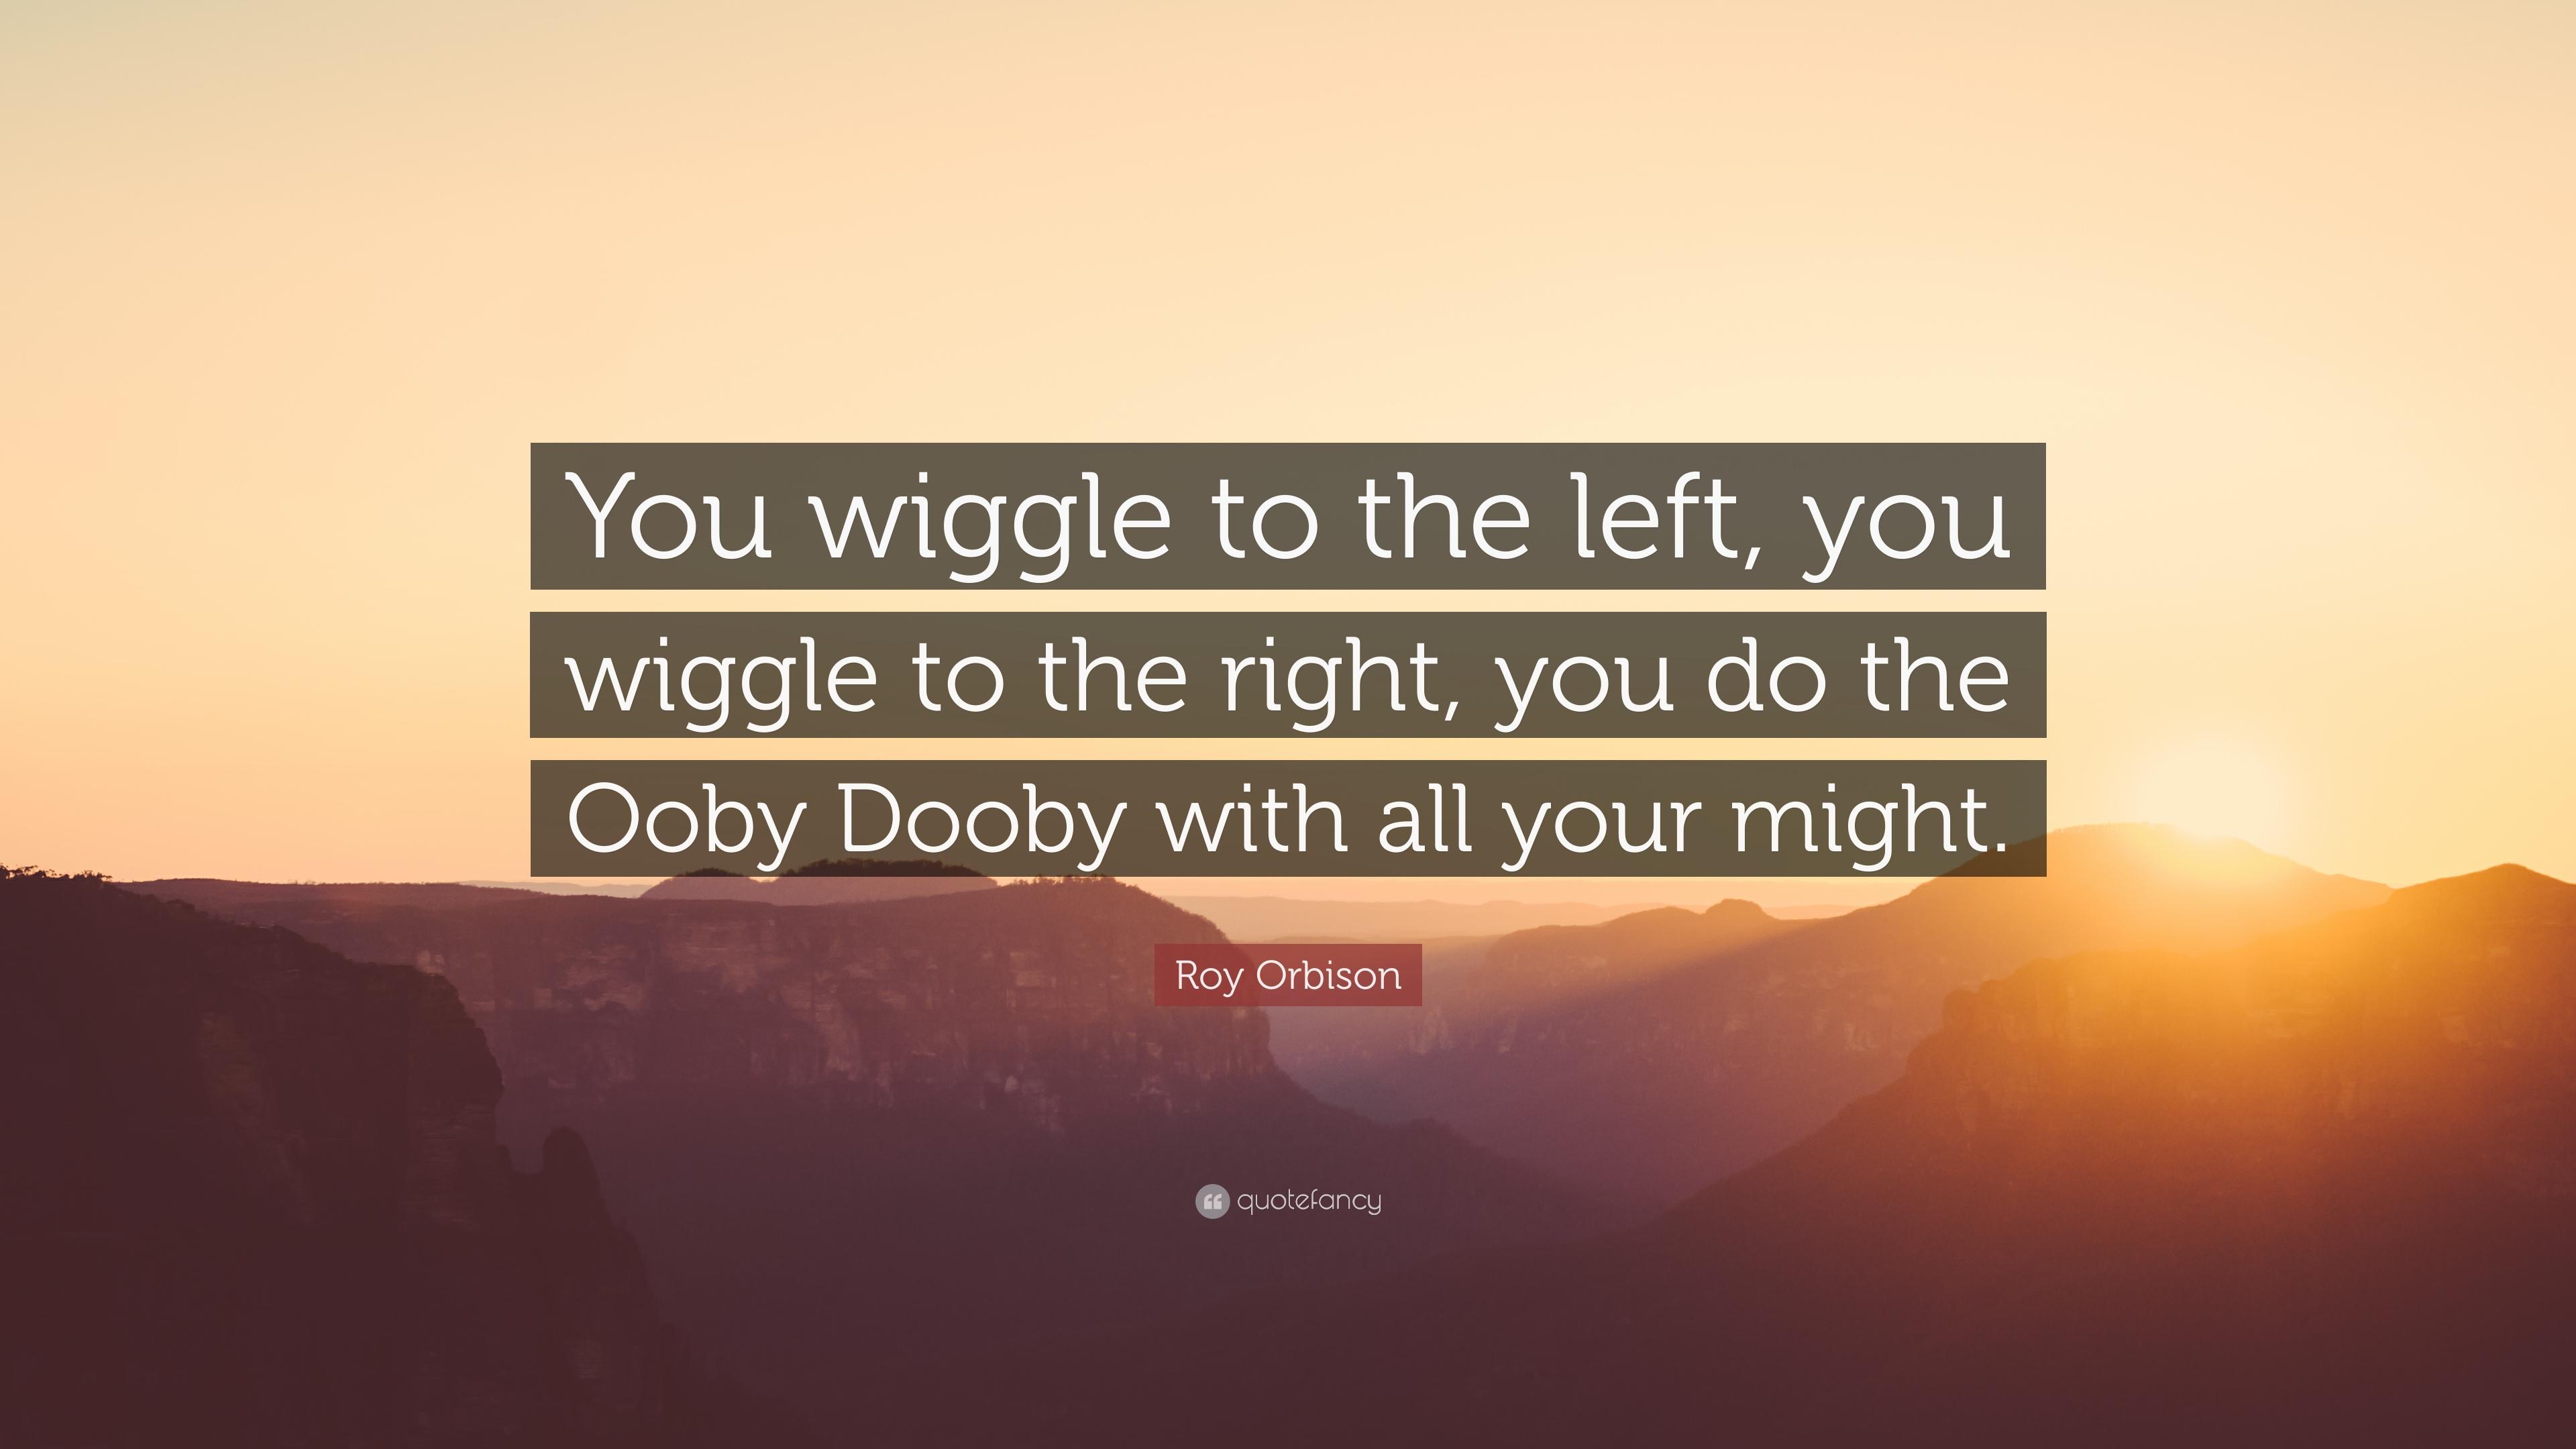 Roy Orbison Quote: “You wiggle to the left, you wiggle to the right